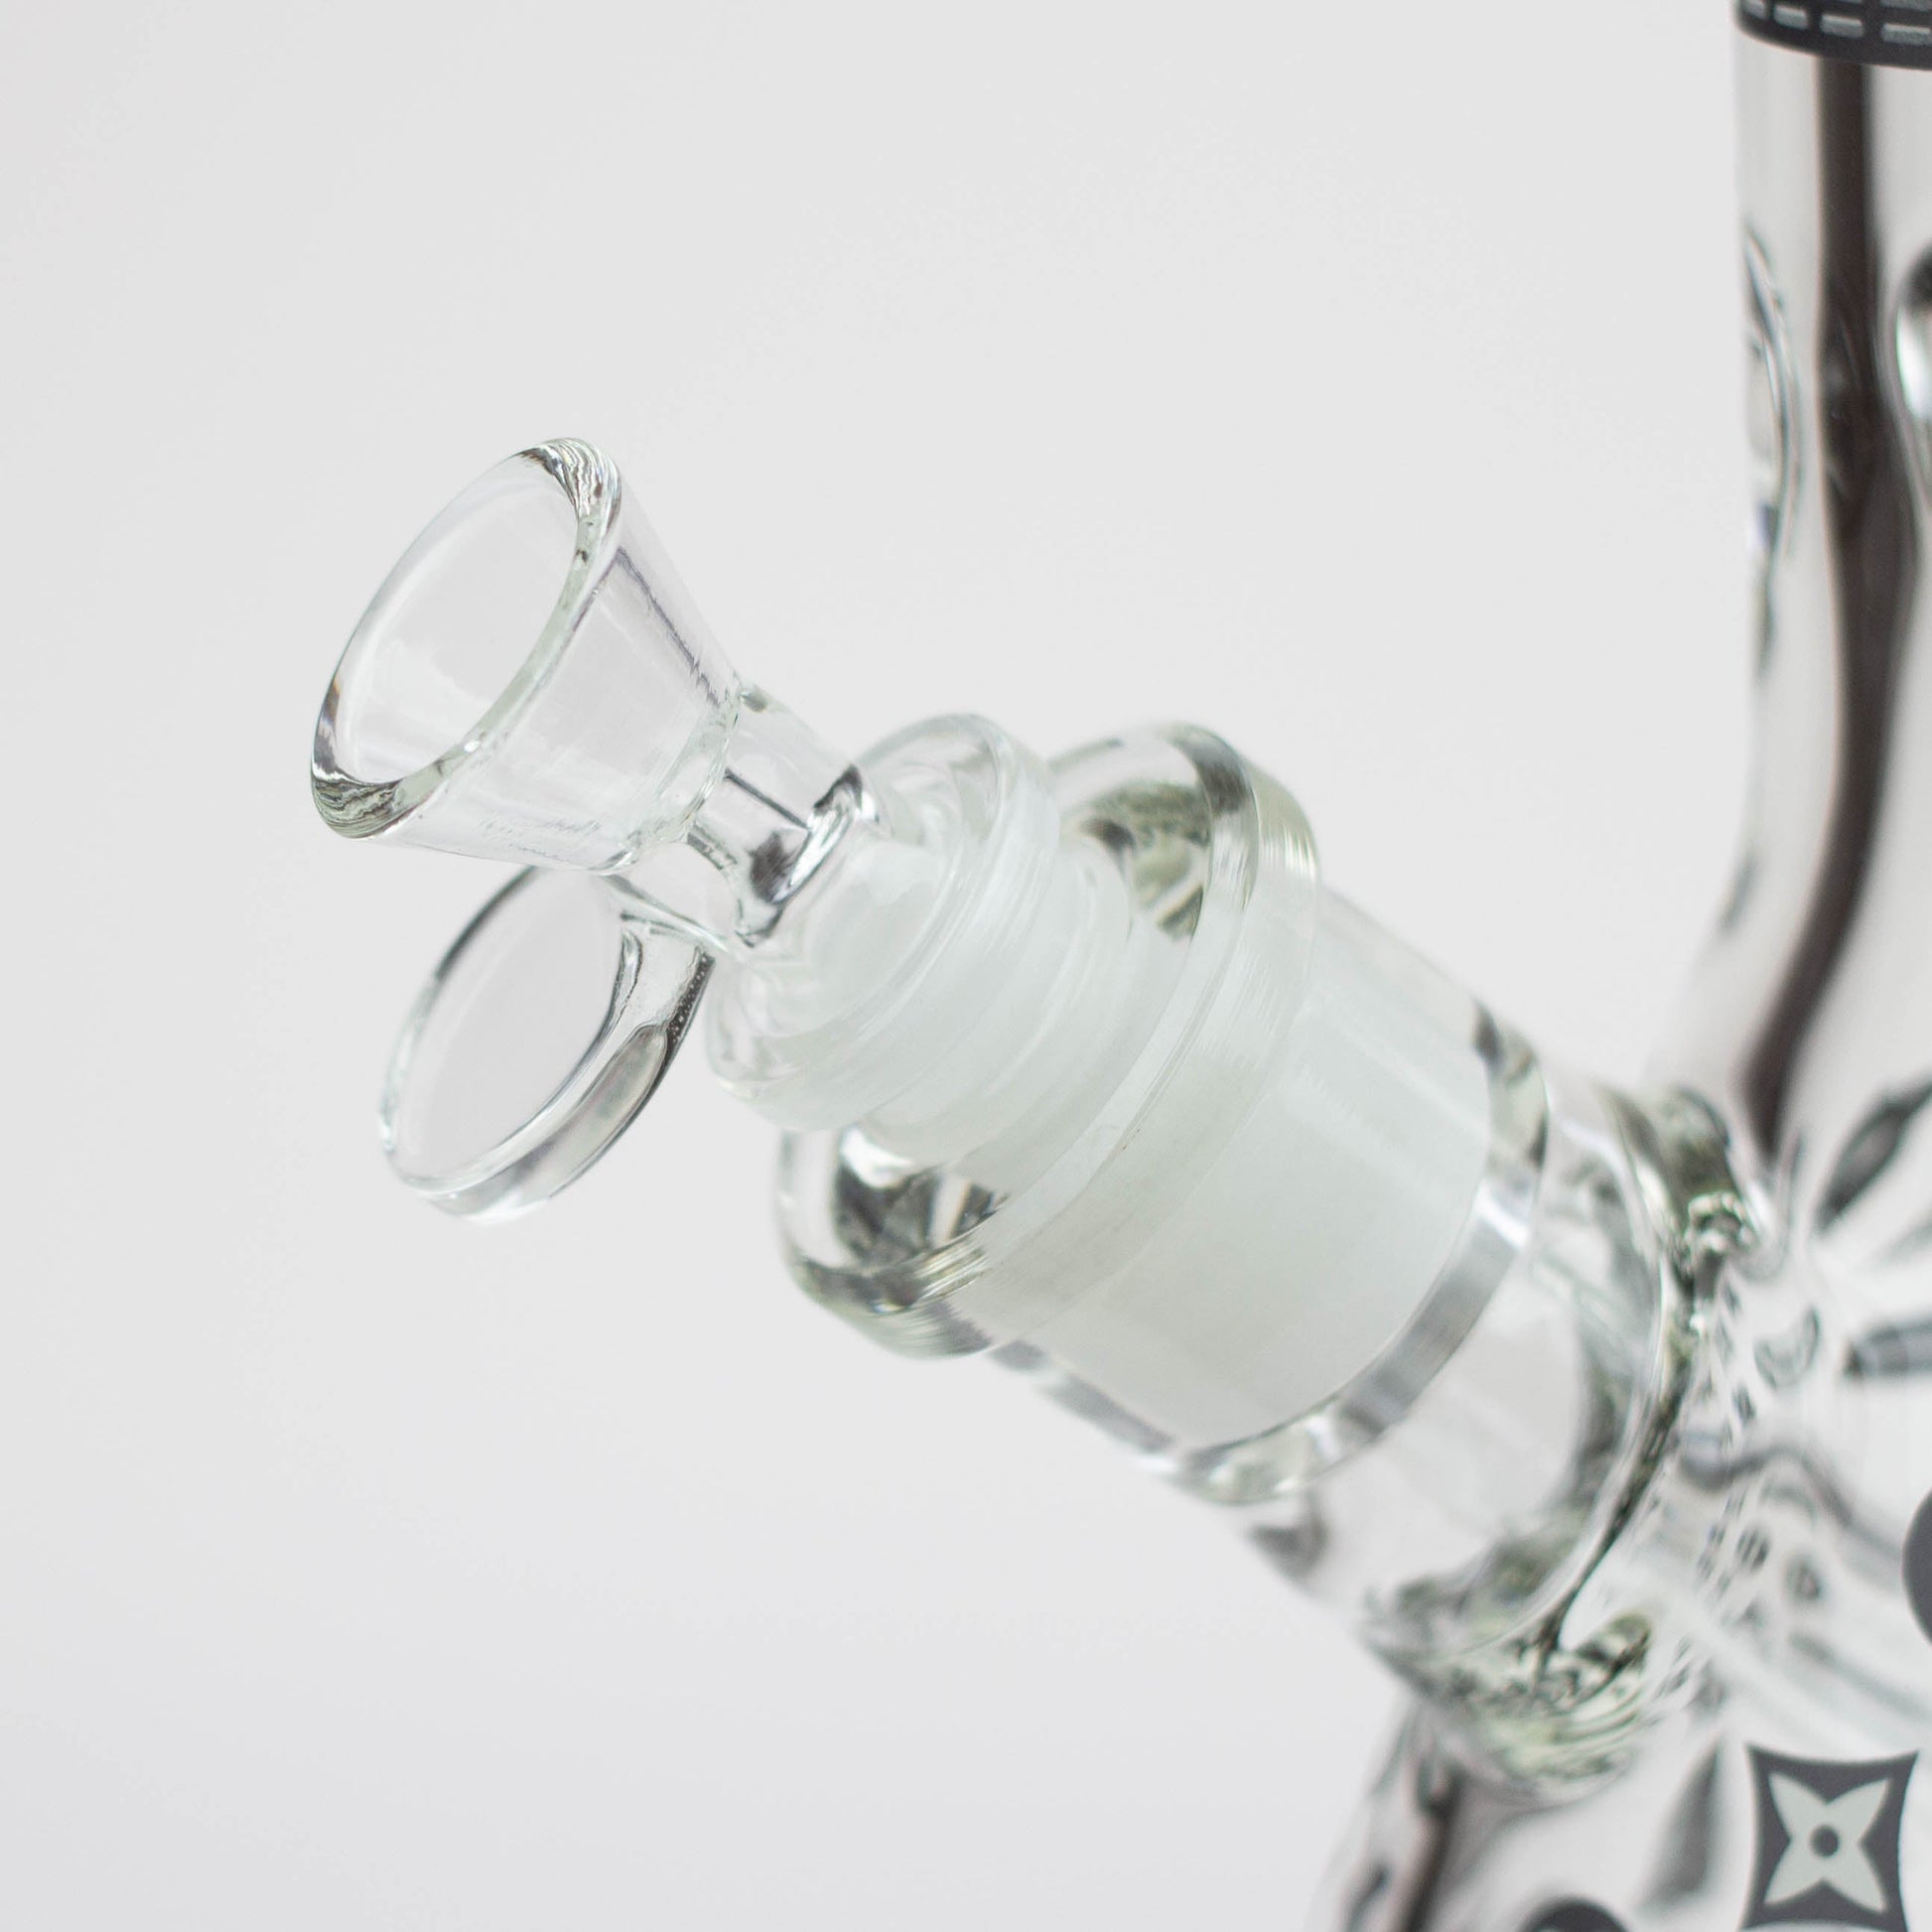 18" LV Glow in the dark 7 mm glass water bong_2